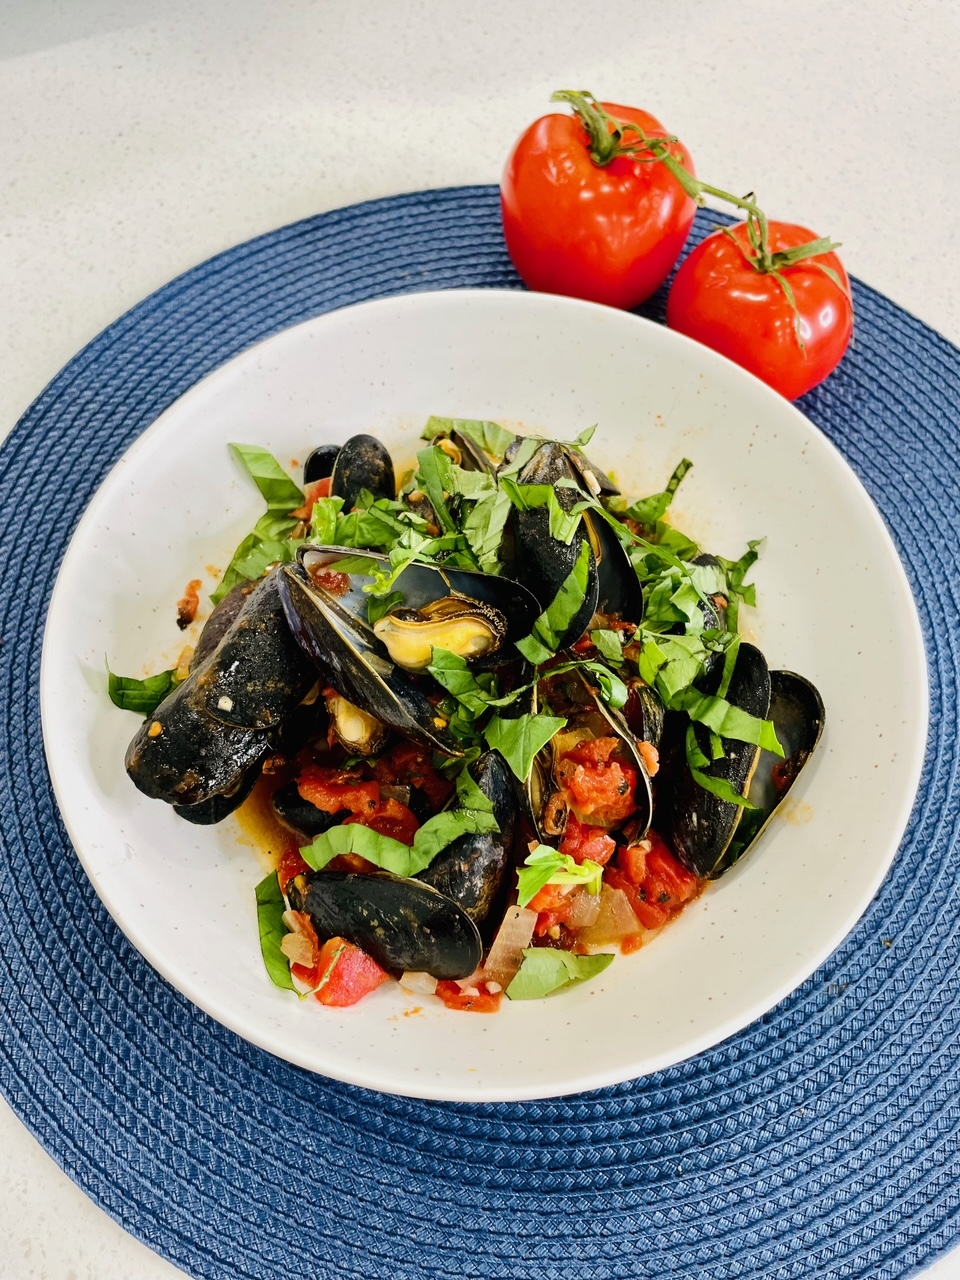 PEI Mussels with Fire Roasted Tomato & Basil Sauce